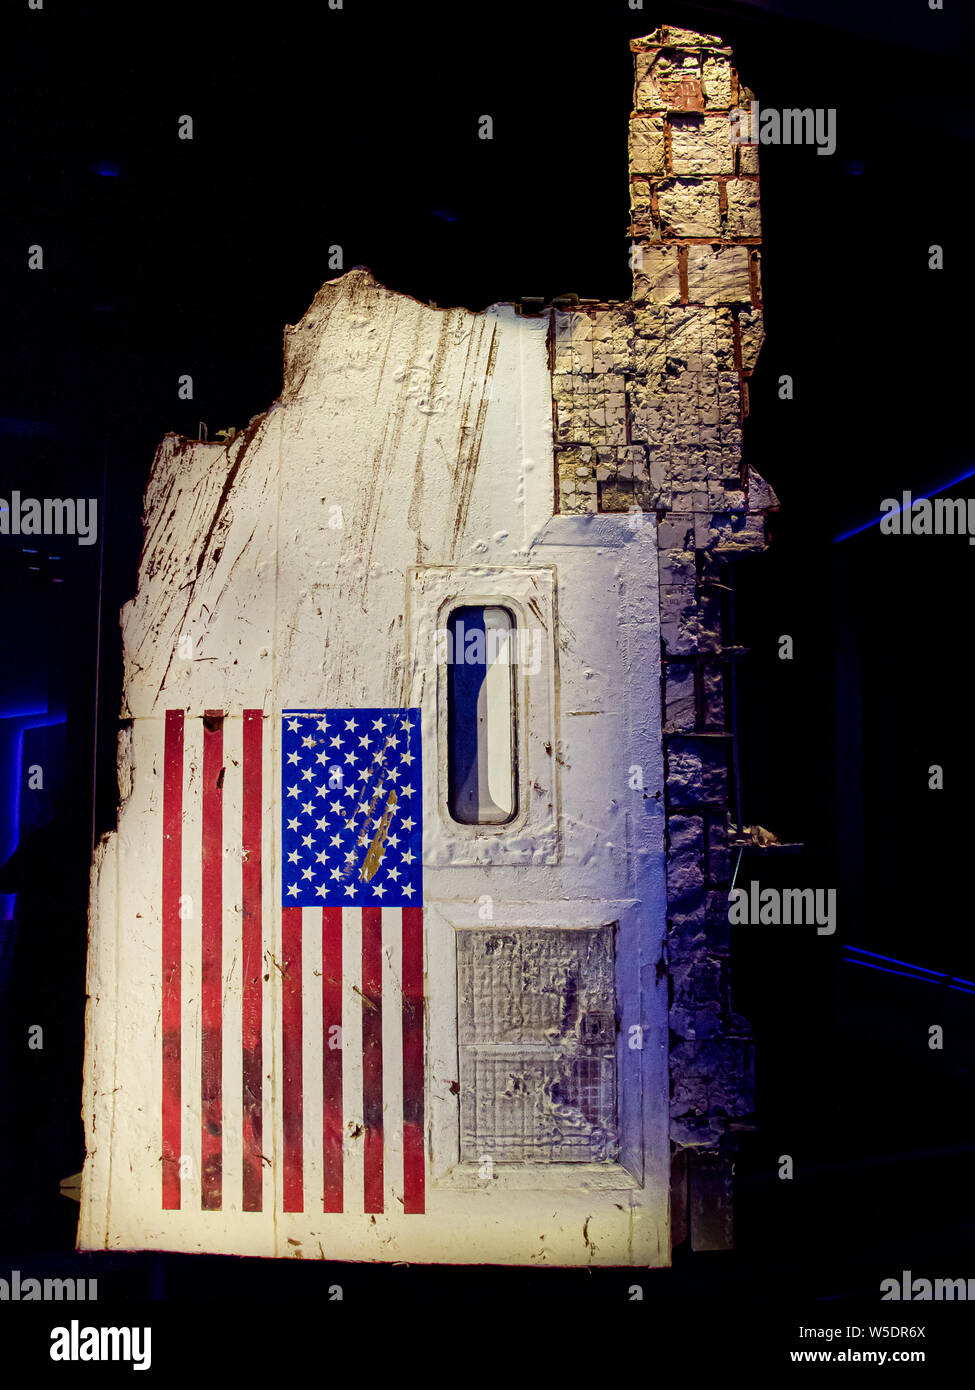 TITUSVILLE, FLORIDA - AUG 22, 2018: Kennedy Space Center.  The remains of the Challenger shuttle on exhibit. Stock Photo